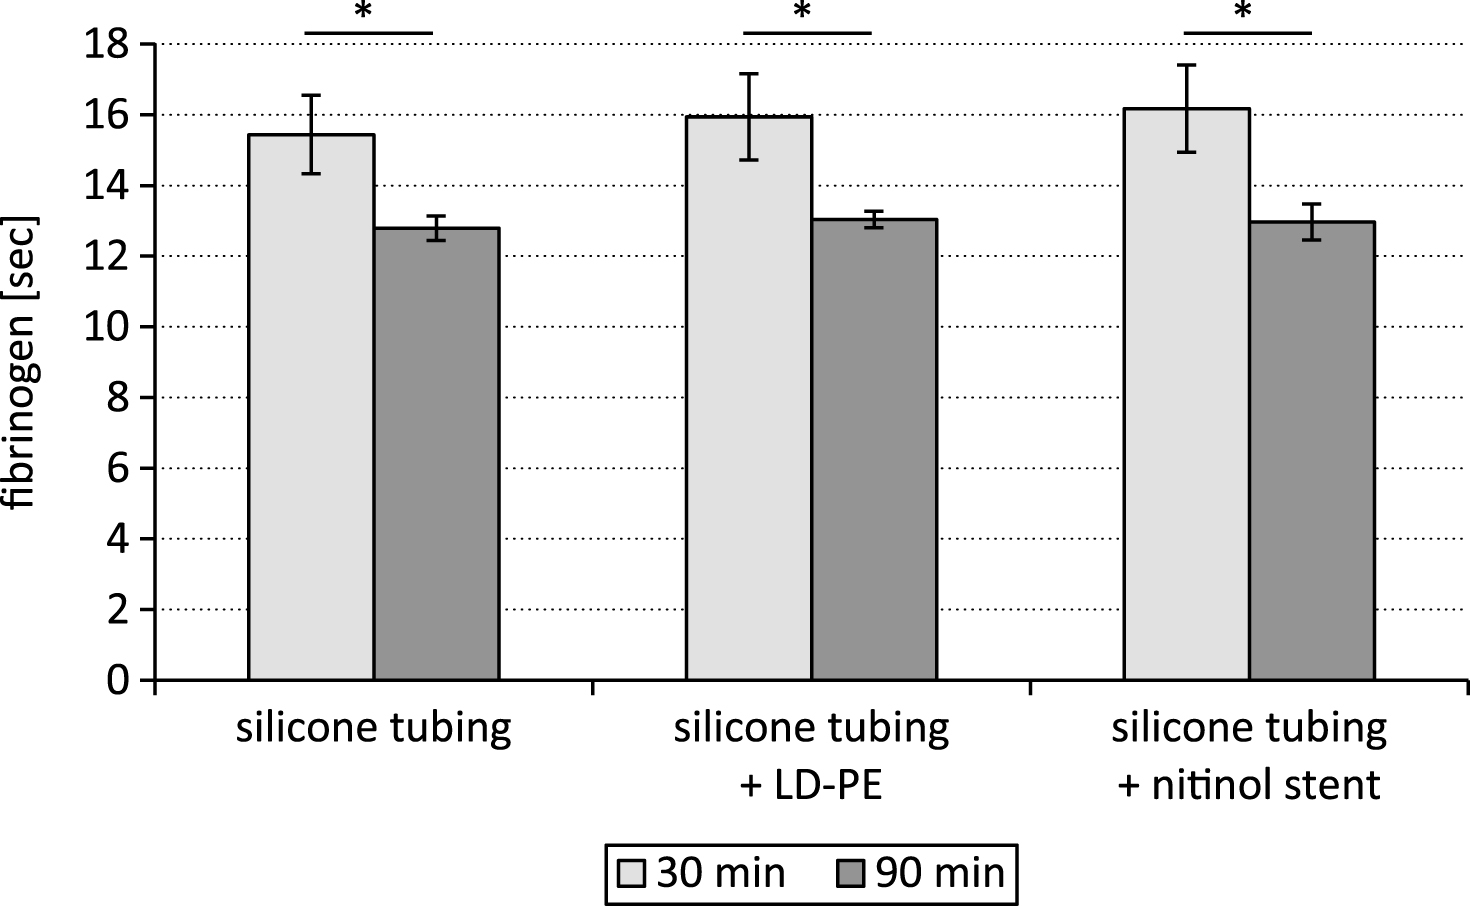 Fibrinogen content after testing a silicone tubing with integrated samples (LD-PE: low density polyethylene tube, nitinol stent) in a closed loop model; *p < 0.05, n = 6.